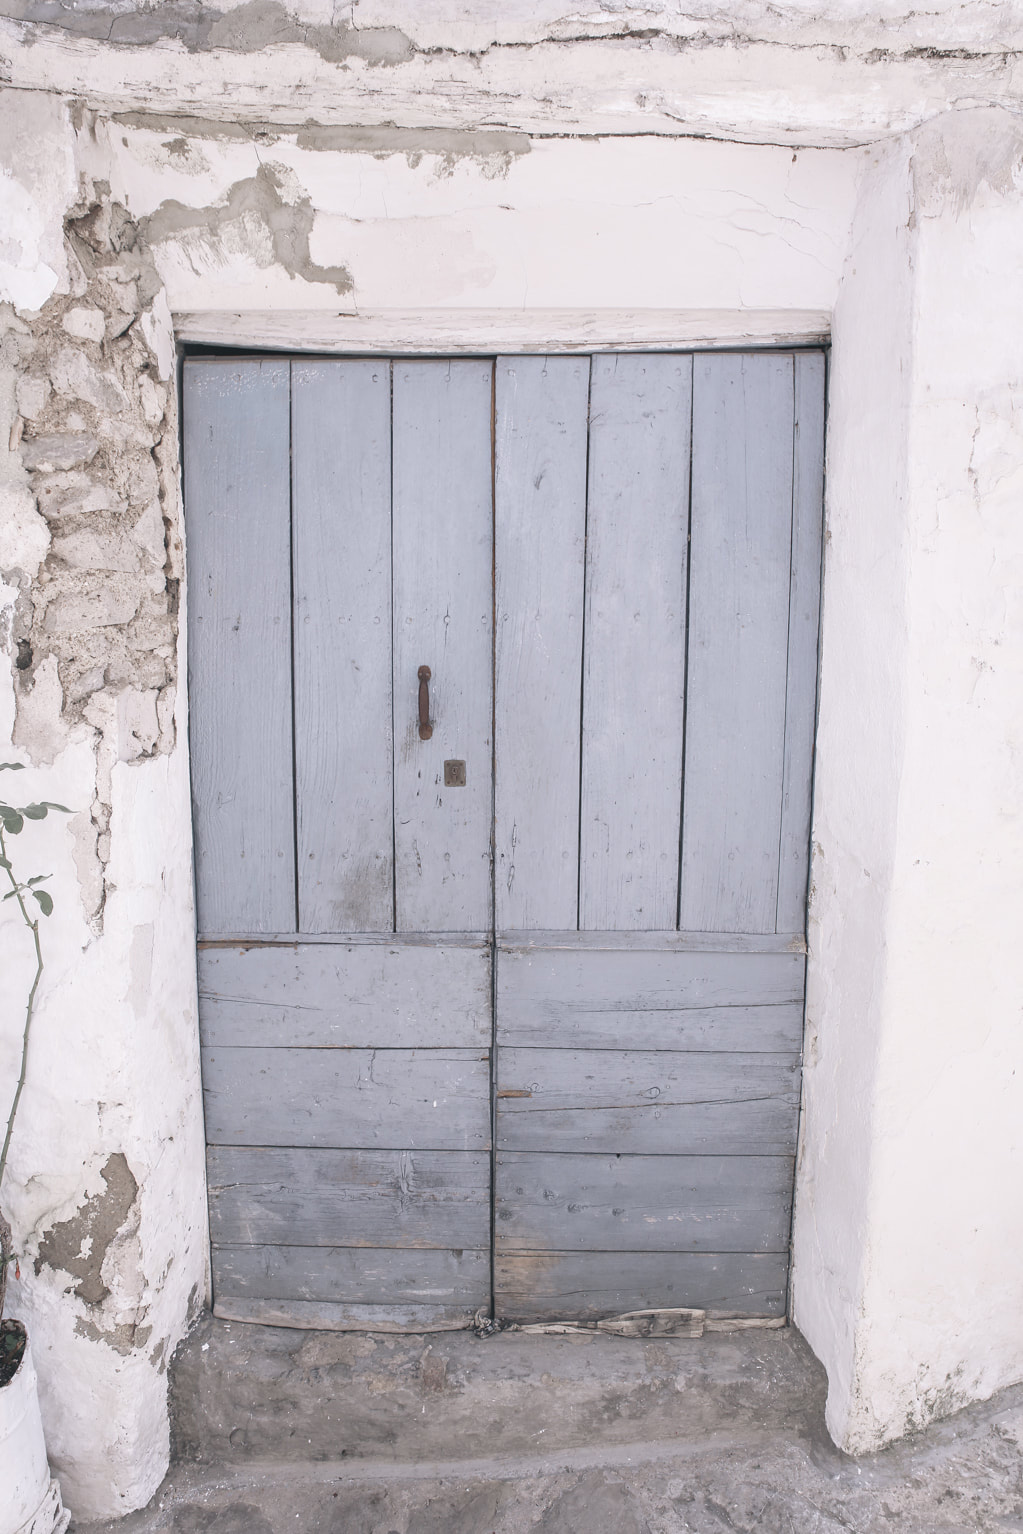 Discovering the little white town of Ubrique, Southern Spain by The Belle Blog 